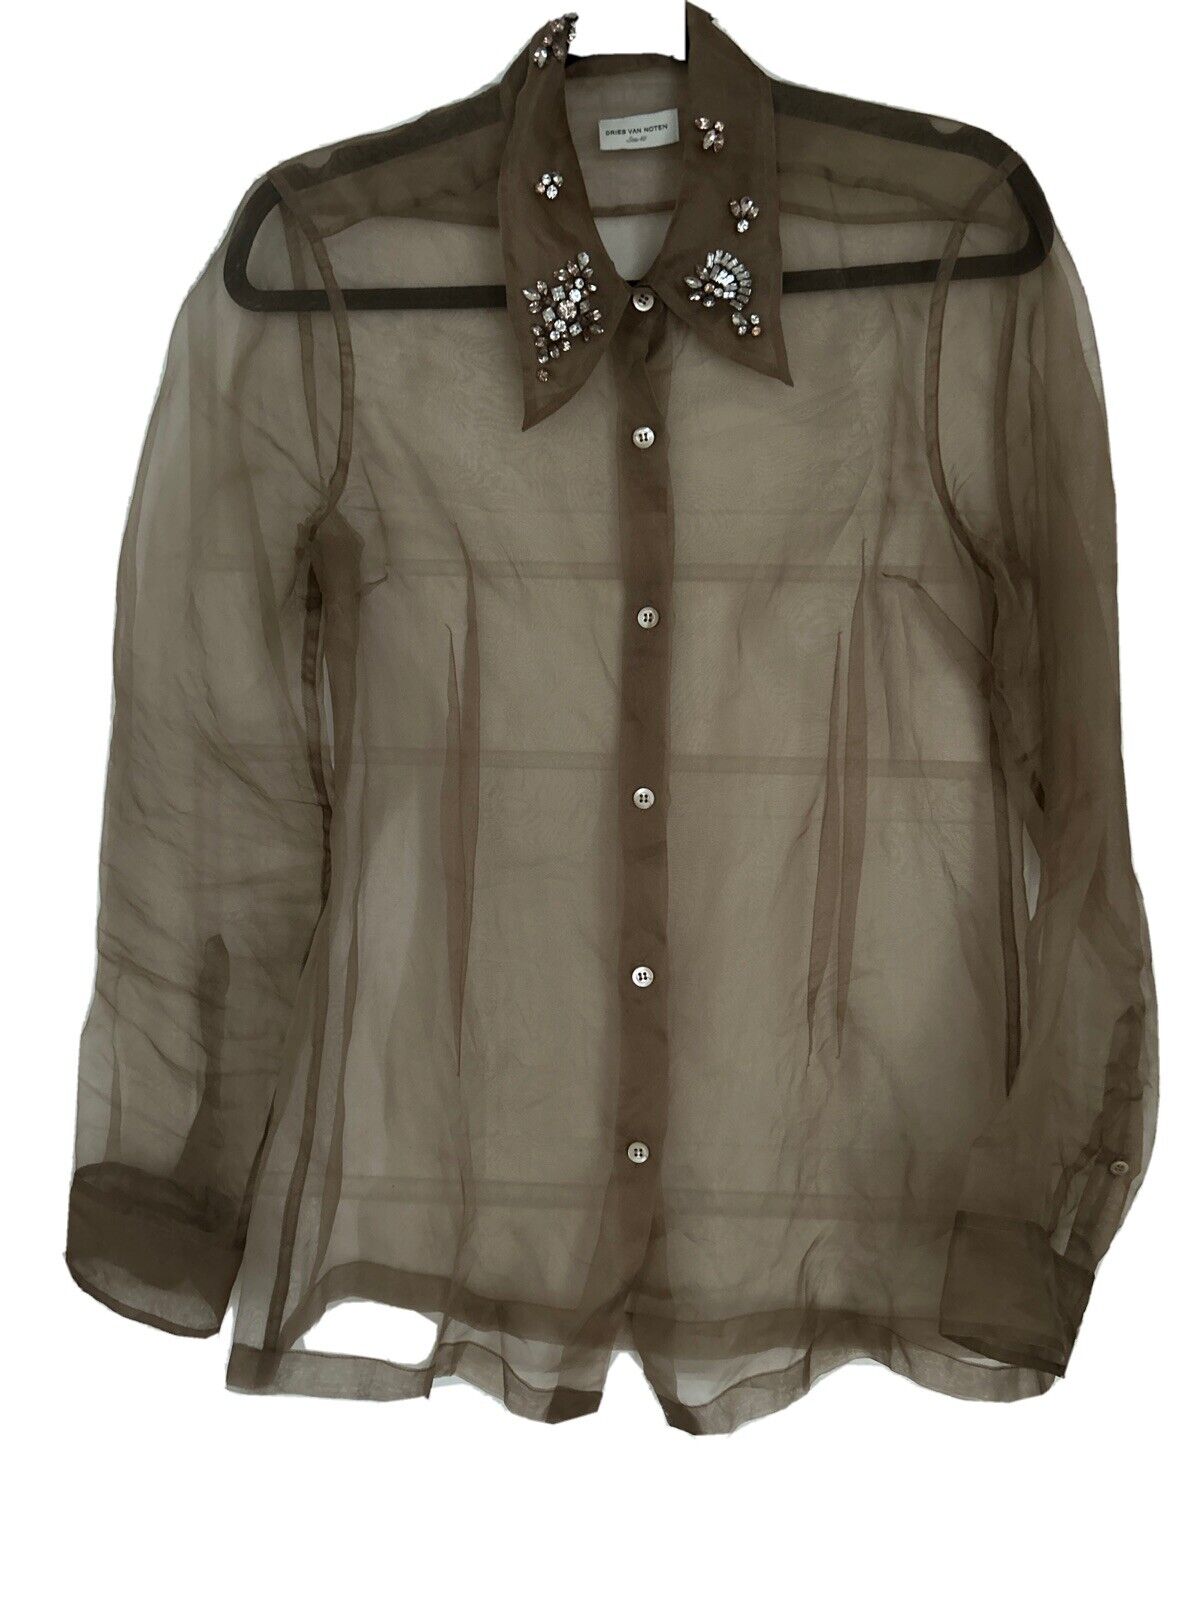 Dries Van Noten Silk Blouse With Jeweled Collar, Size 40